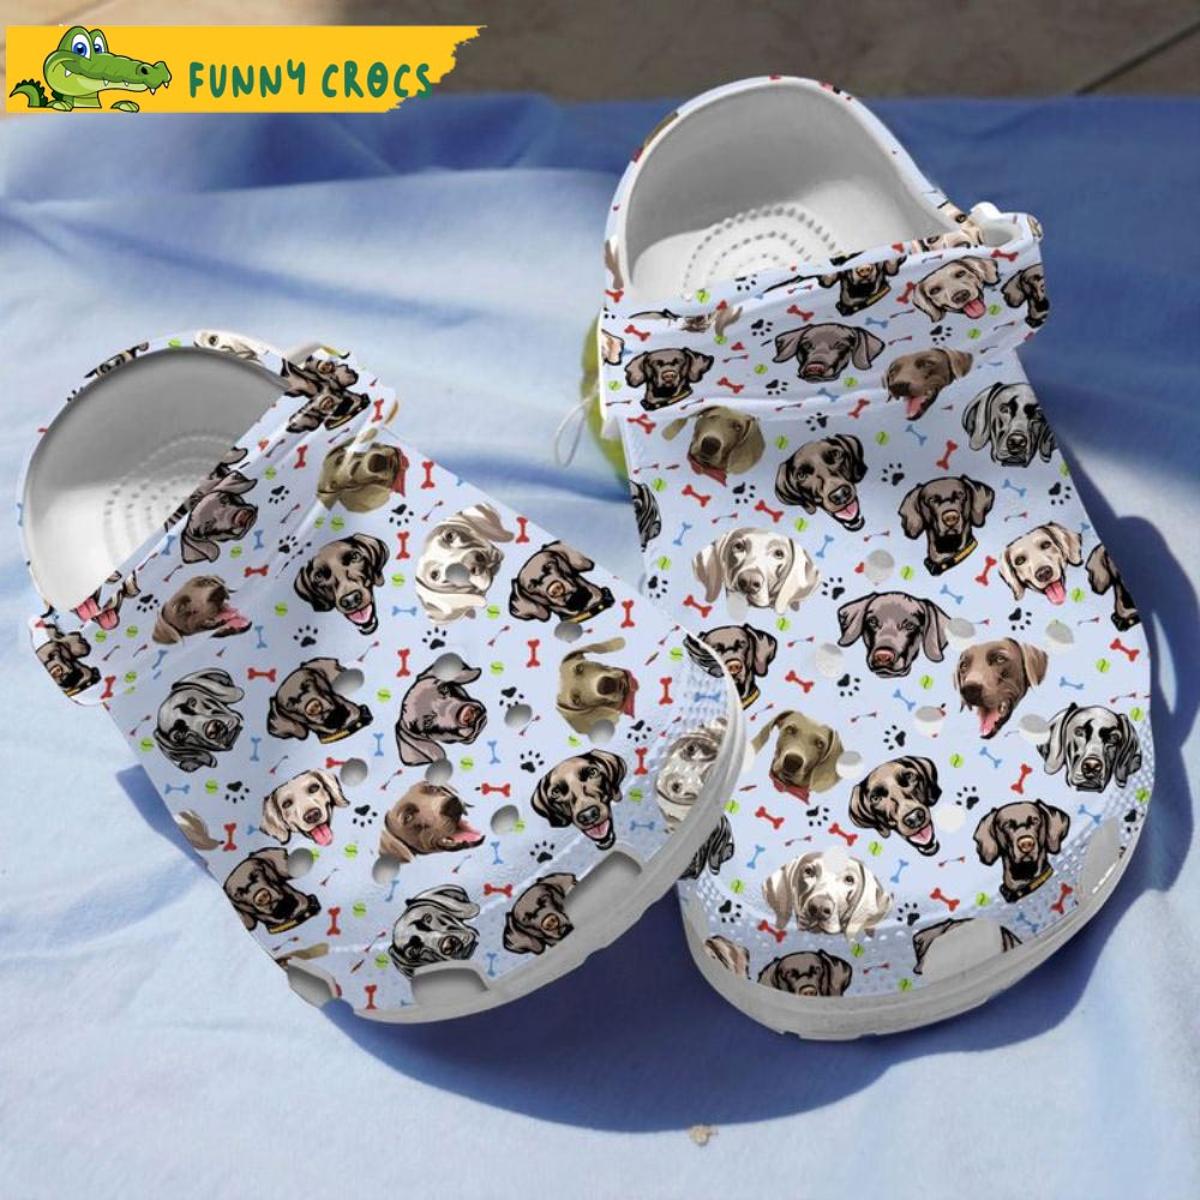 Cute Dogs Collections Crocs Slippers